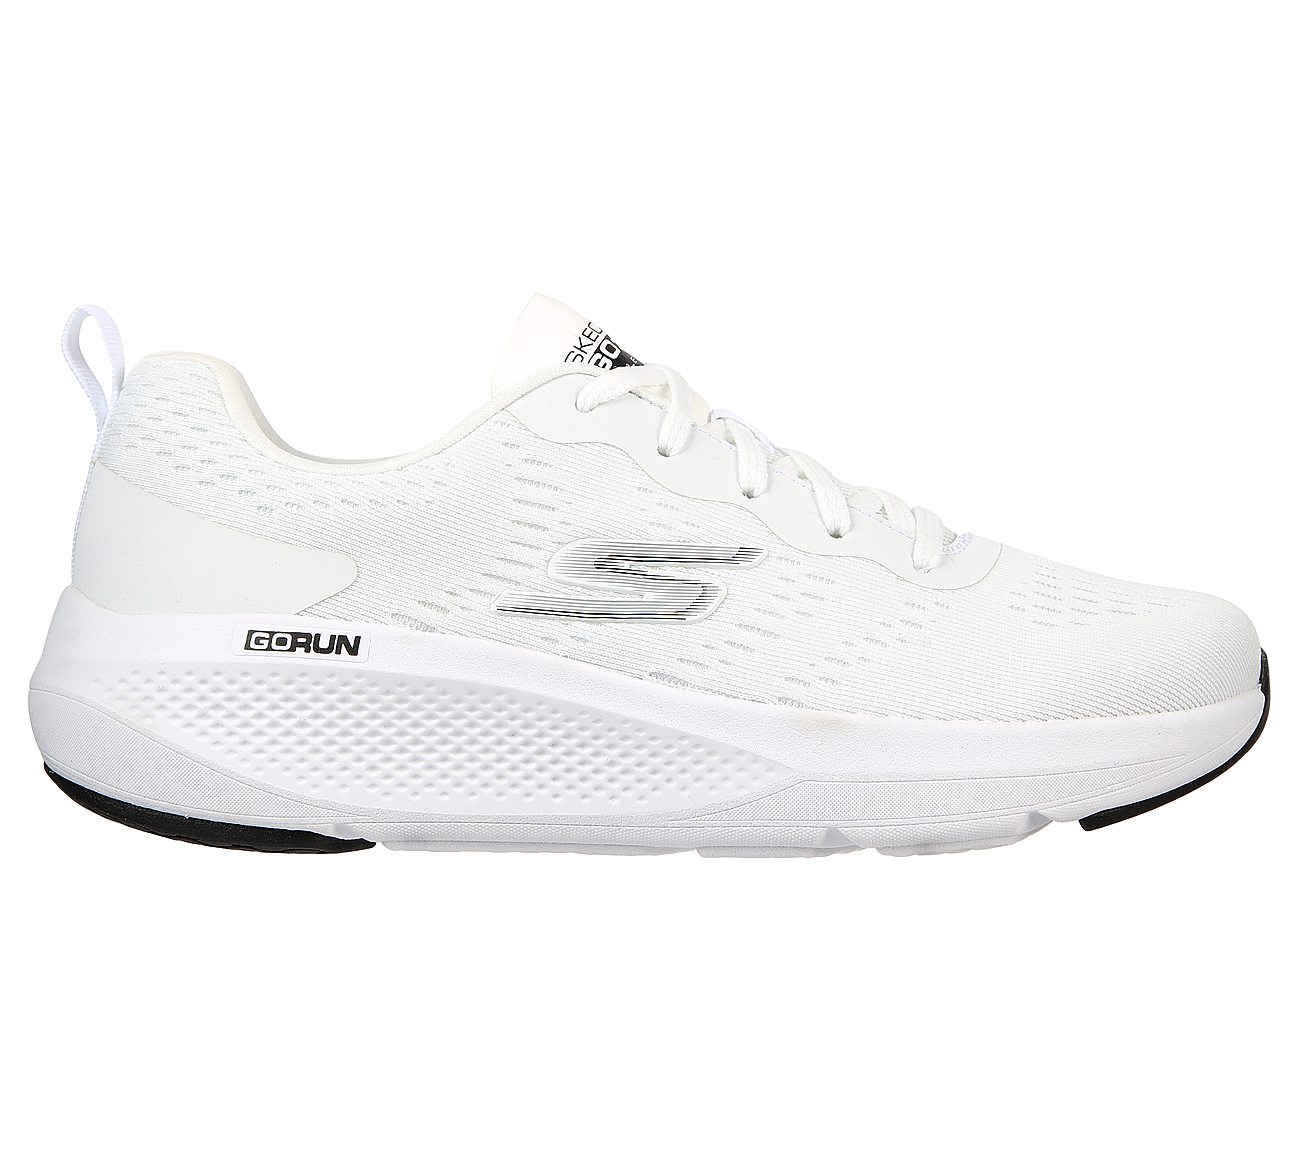 Skechers - TRADITIONAL ENGINEERED MESH LACE UP - ΛΕΥΚΟ Γυναικεία > Παπούτσια > Αθλητικά > Παπούτσι Low Cut